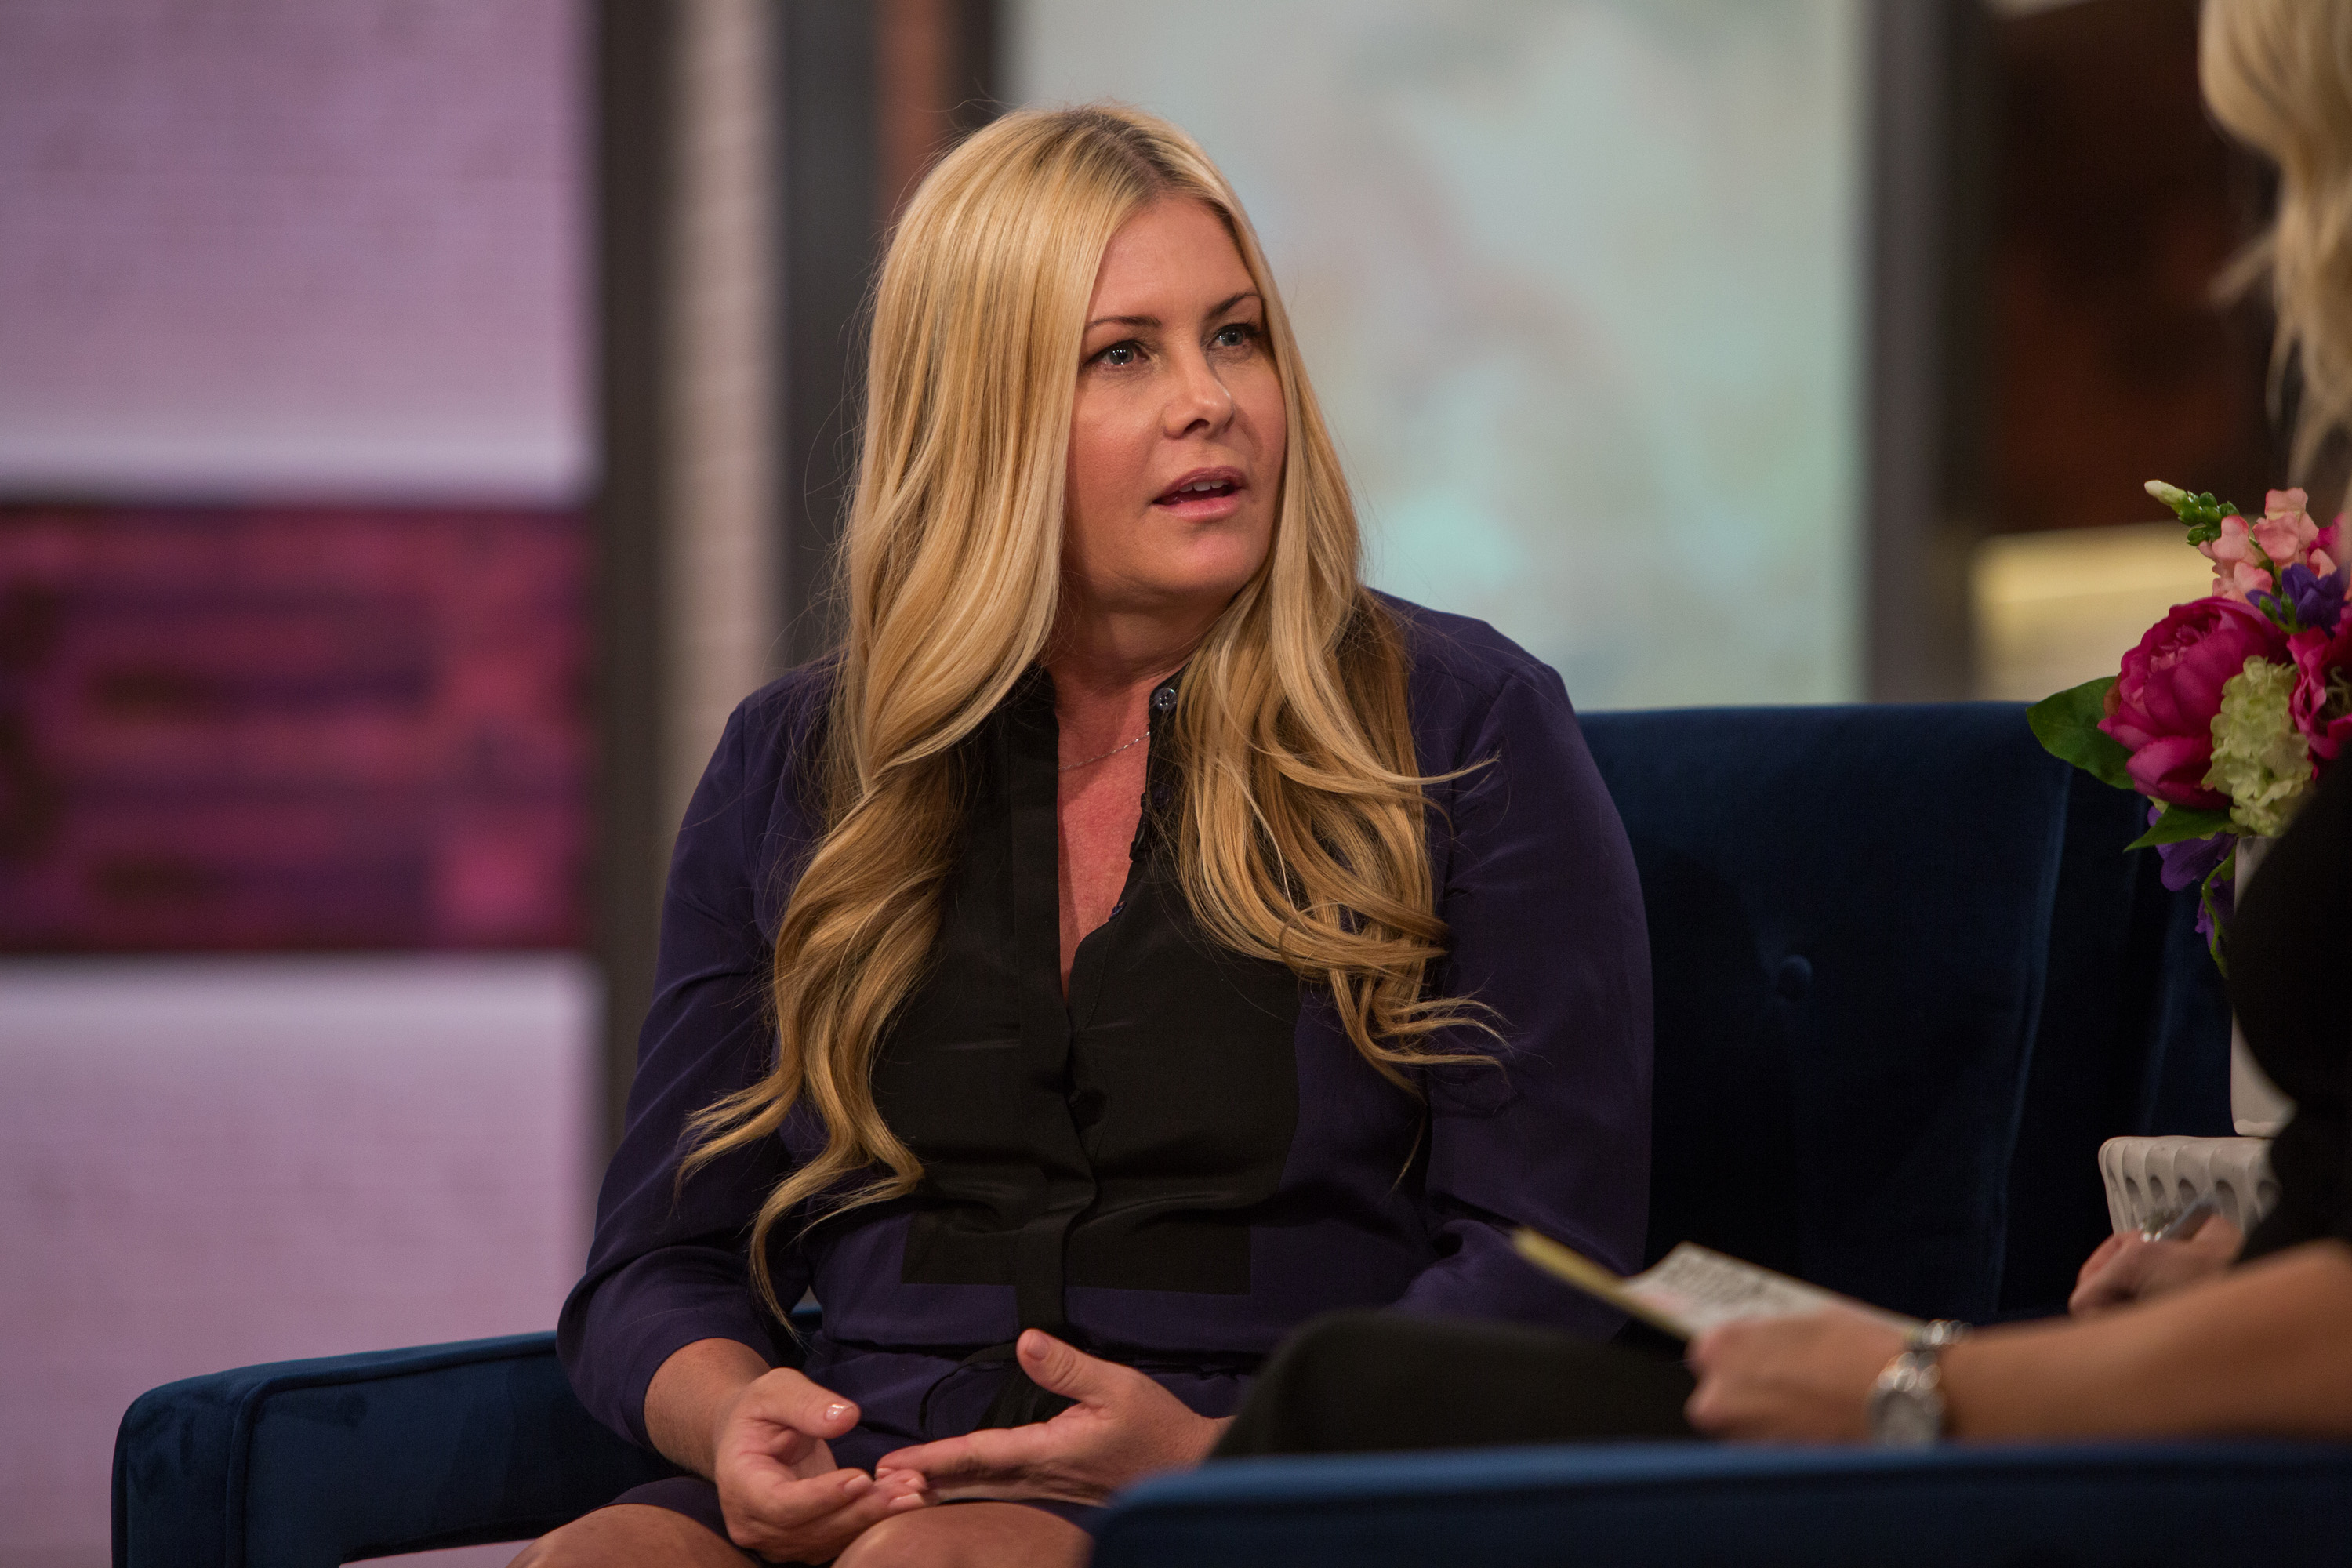 Nicole Eggert on "Megyn Kelly Today" on January 30, 2018. | Source: Getty Images